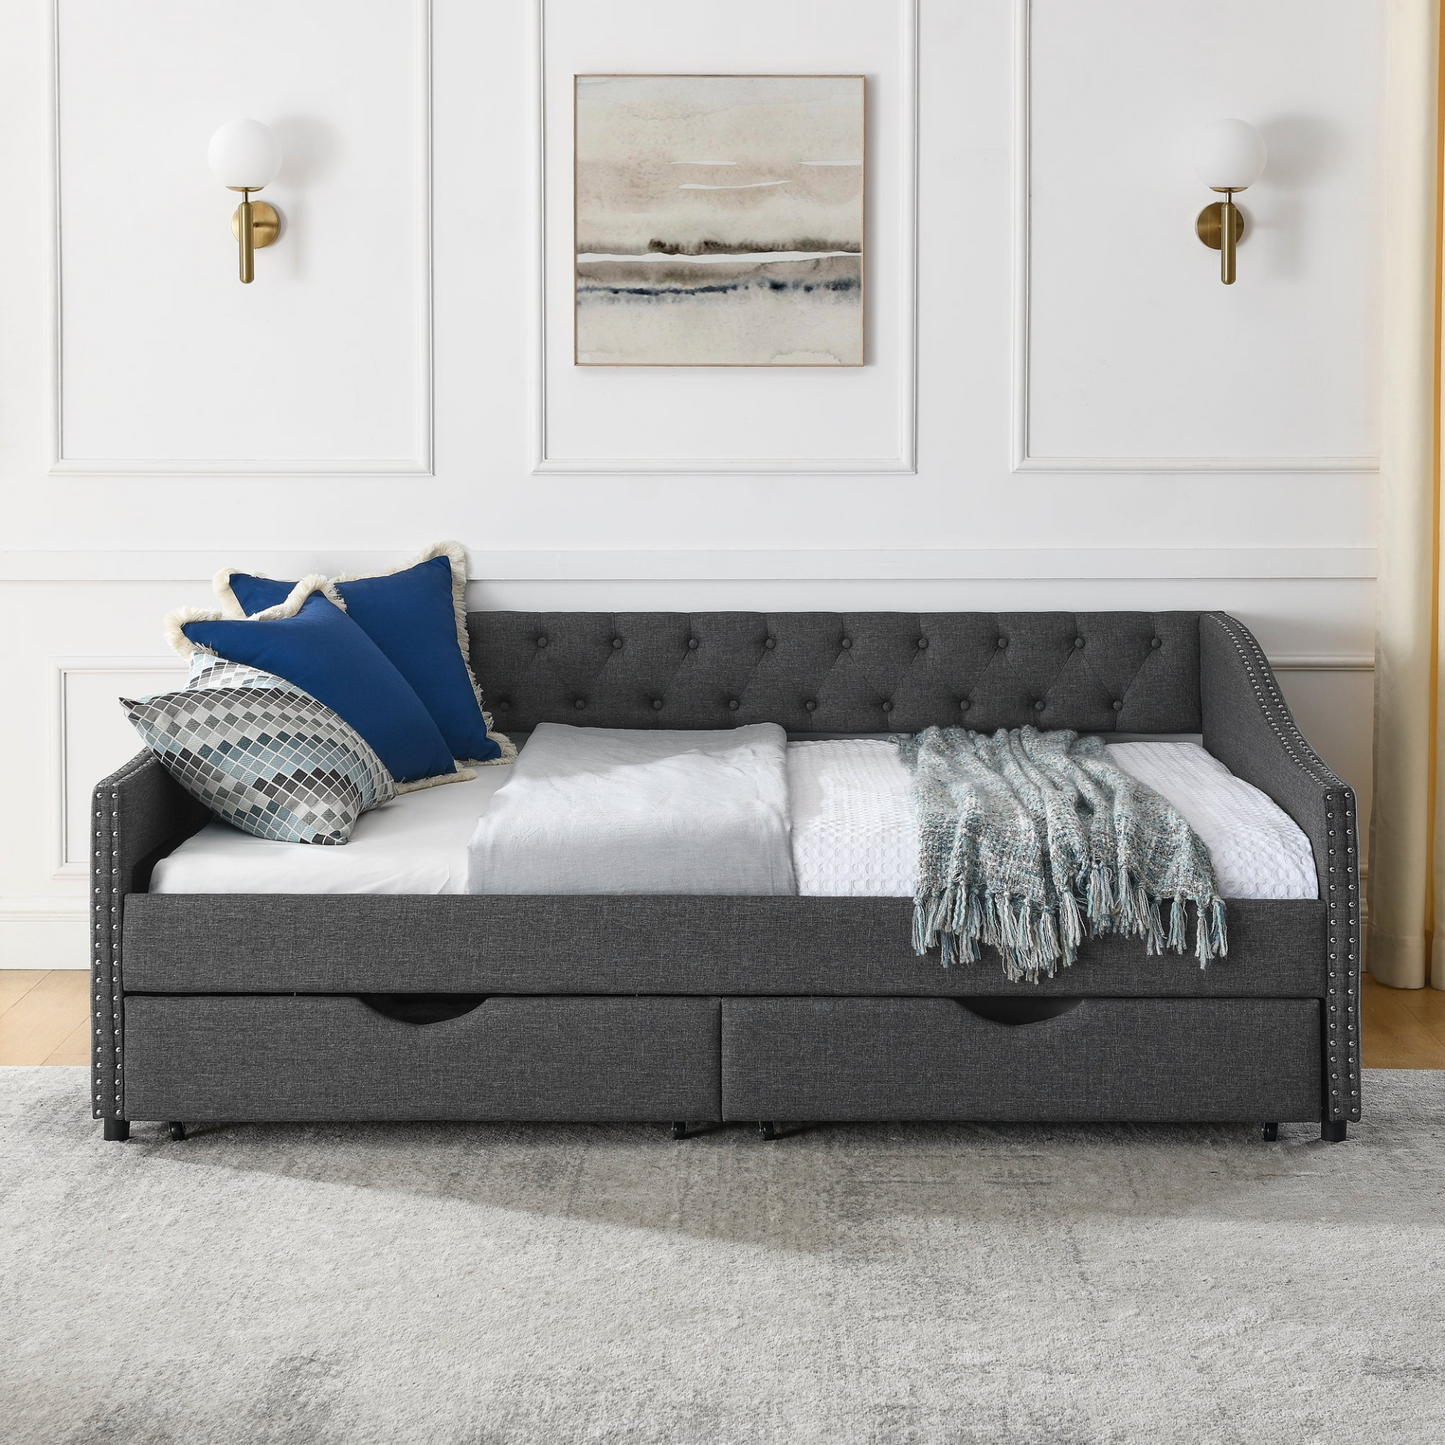 Full Size Daybed with Drawers Upholstered Tufted Sofa Bed, with Button on Back and Copper Nail on Waved Shape Arms(80.5''x55.5''x27.5'')